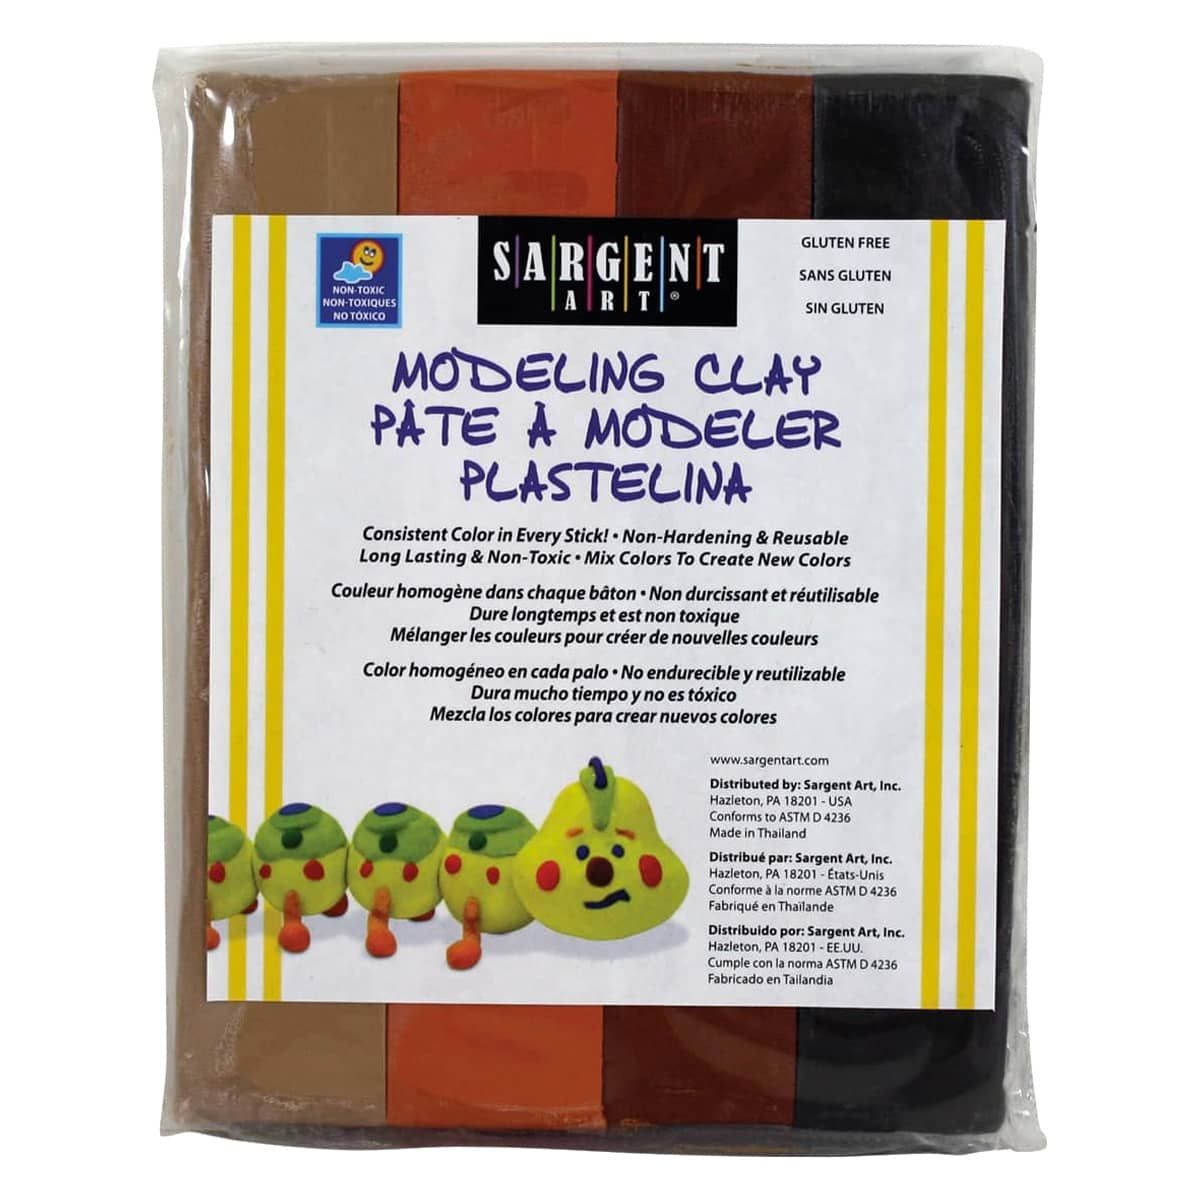  Sargent Art Brown Clay, 5 Pound, Non-Hardening and